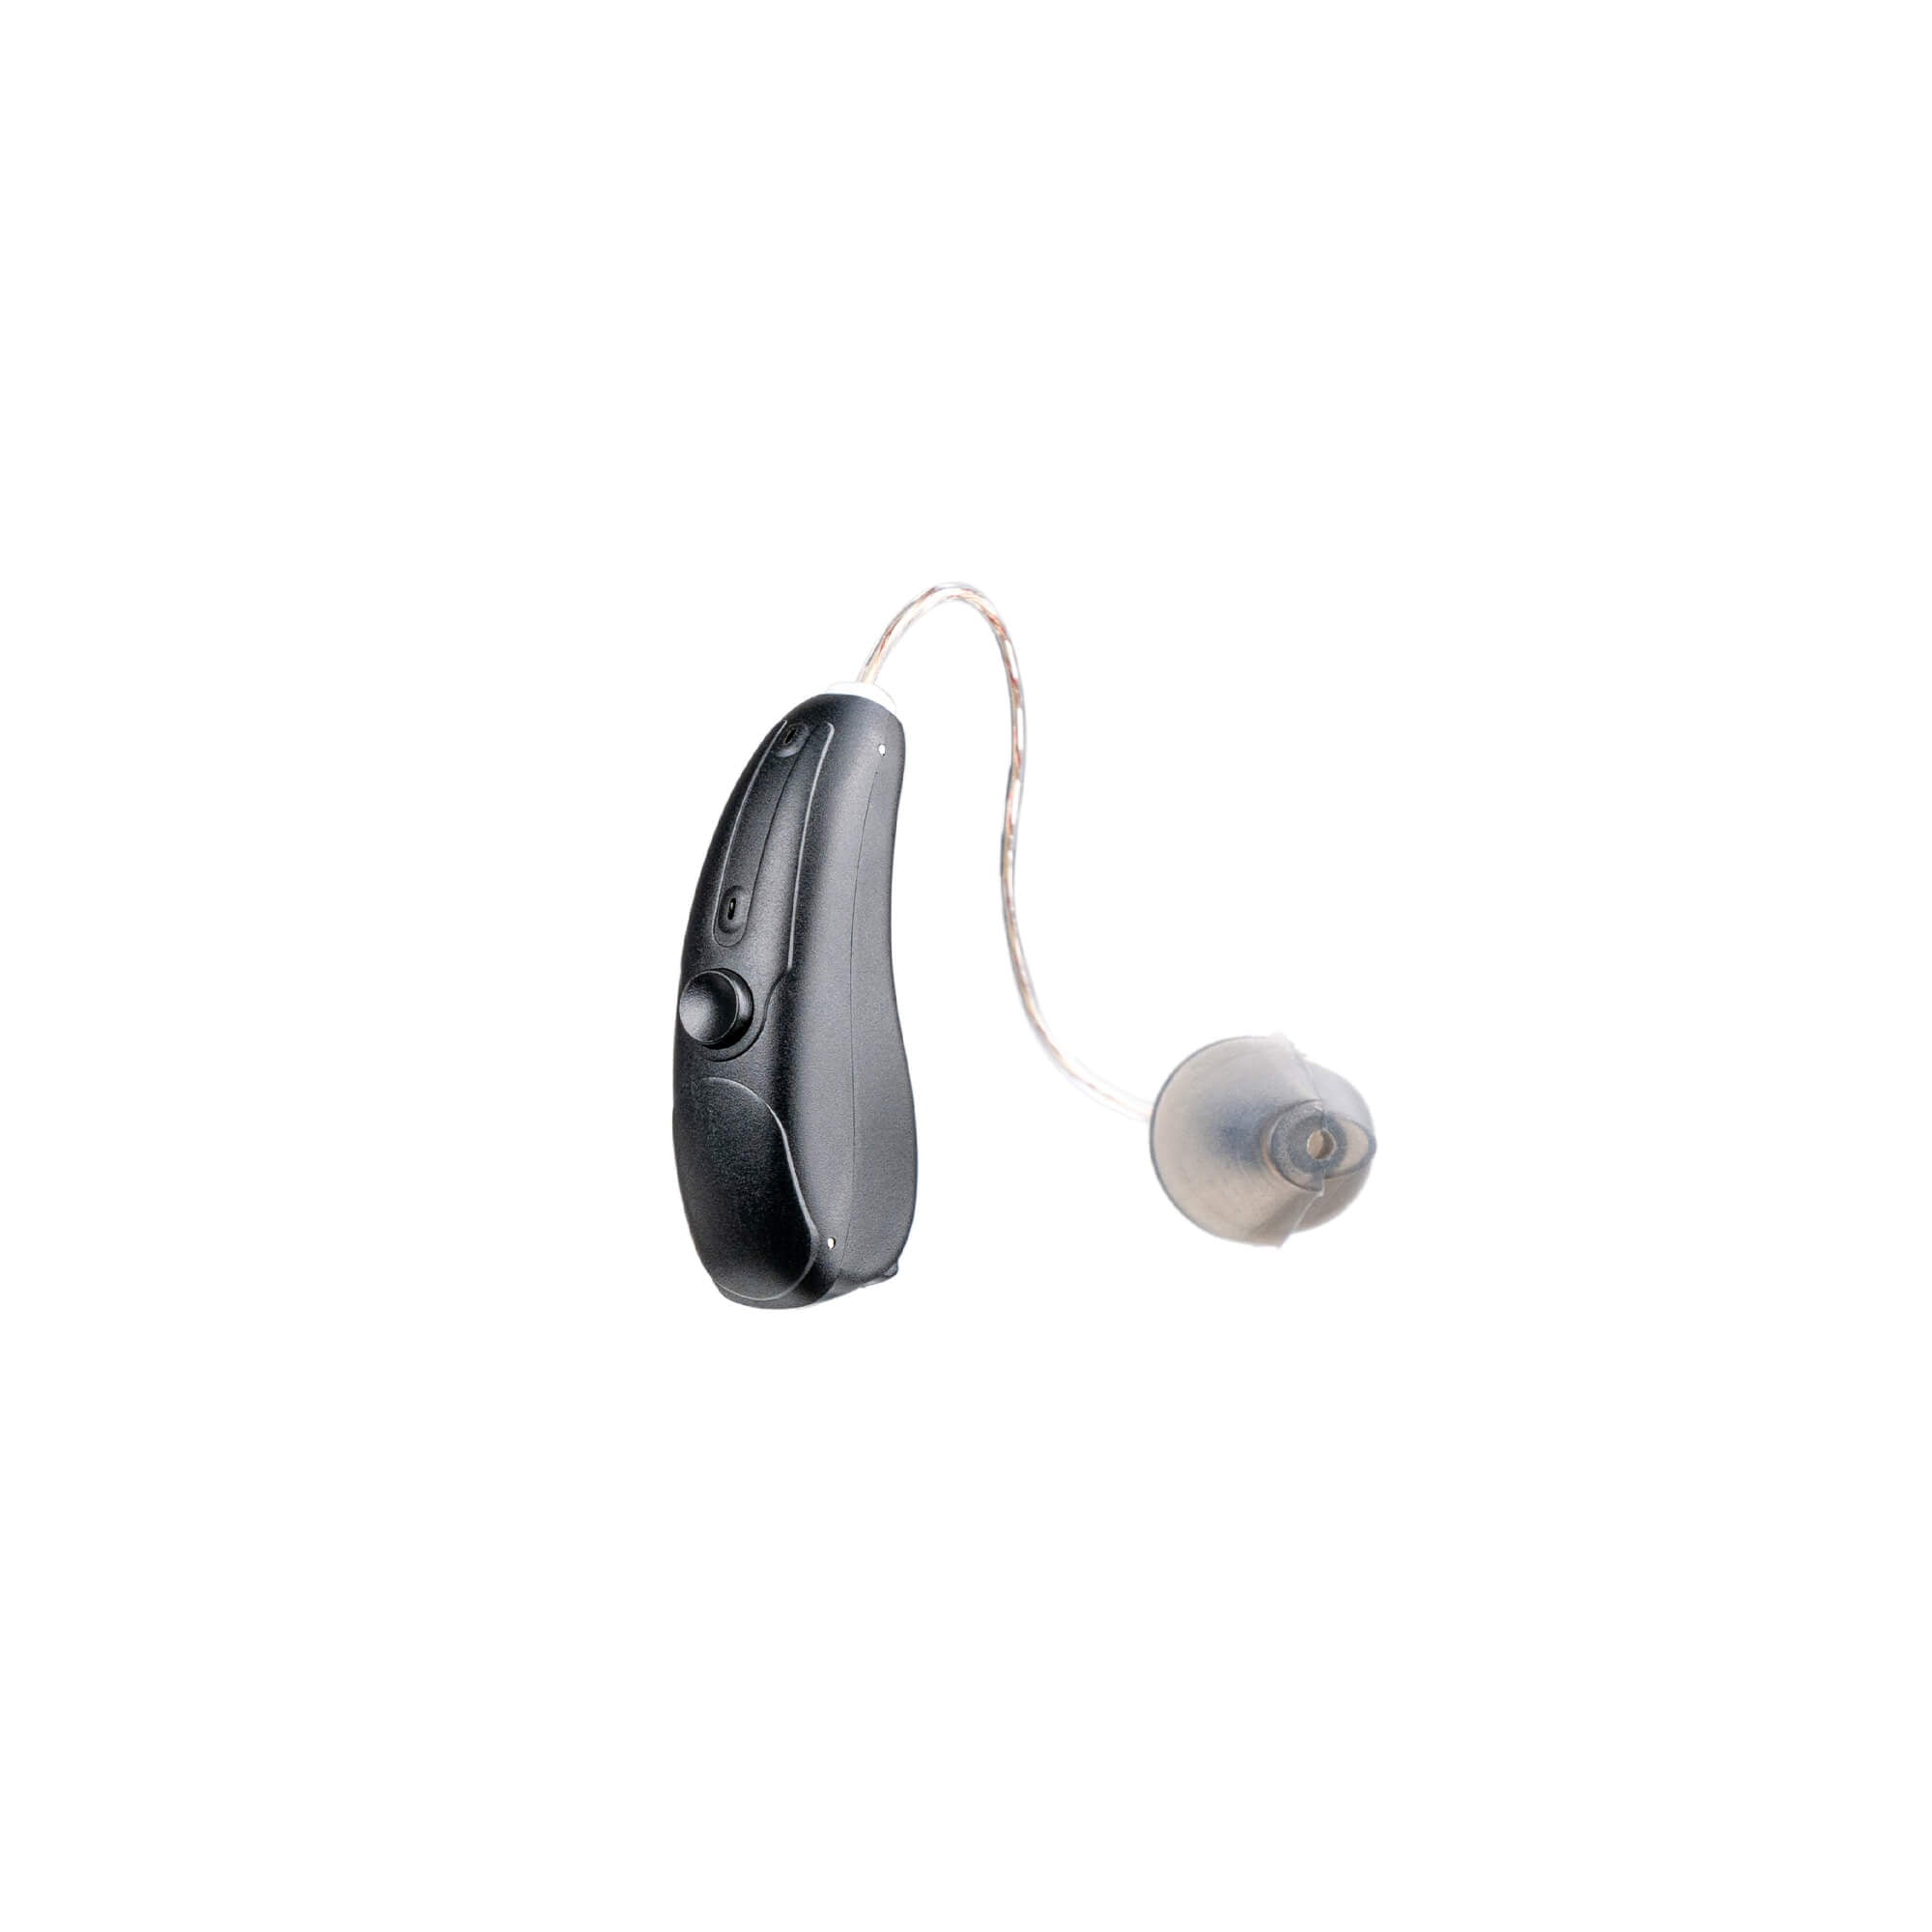 Fisdemo Discoverer Premium Rechargeable Bluetooth Digital RIC Hearing Aids, Dual Microphones Designed for Mild to Moderate Hearing Loss